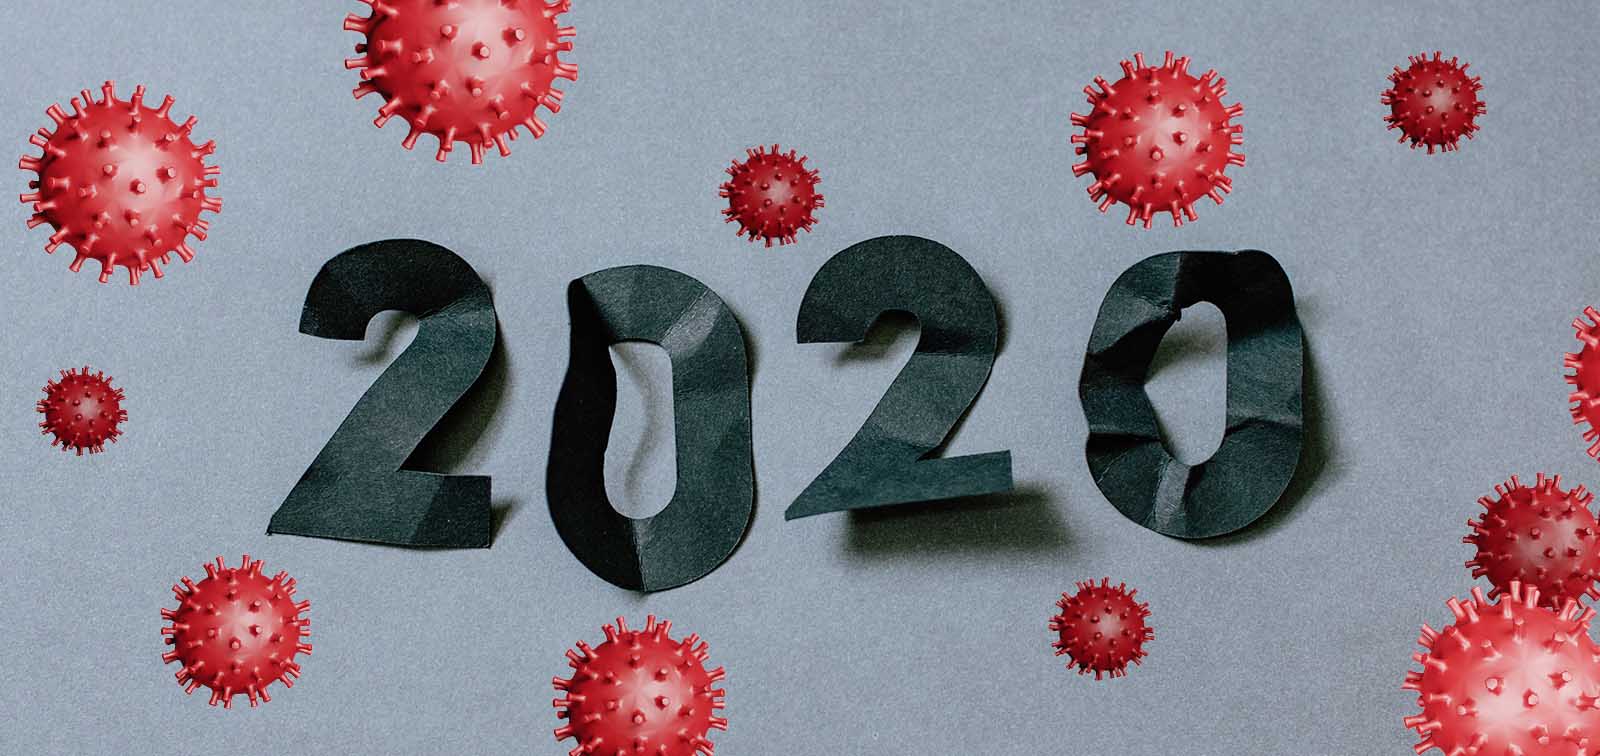 Guidance in the Midst of a Global Pandemic